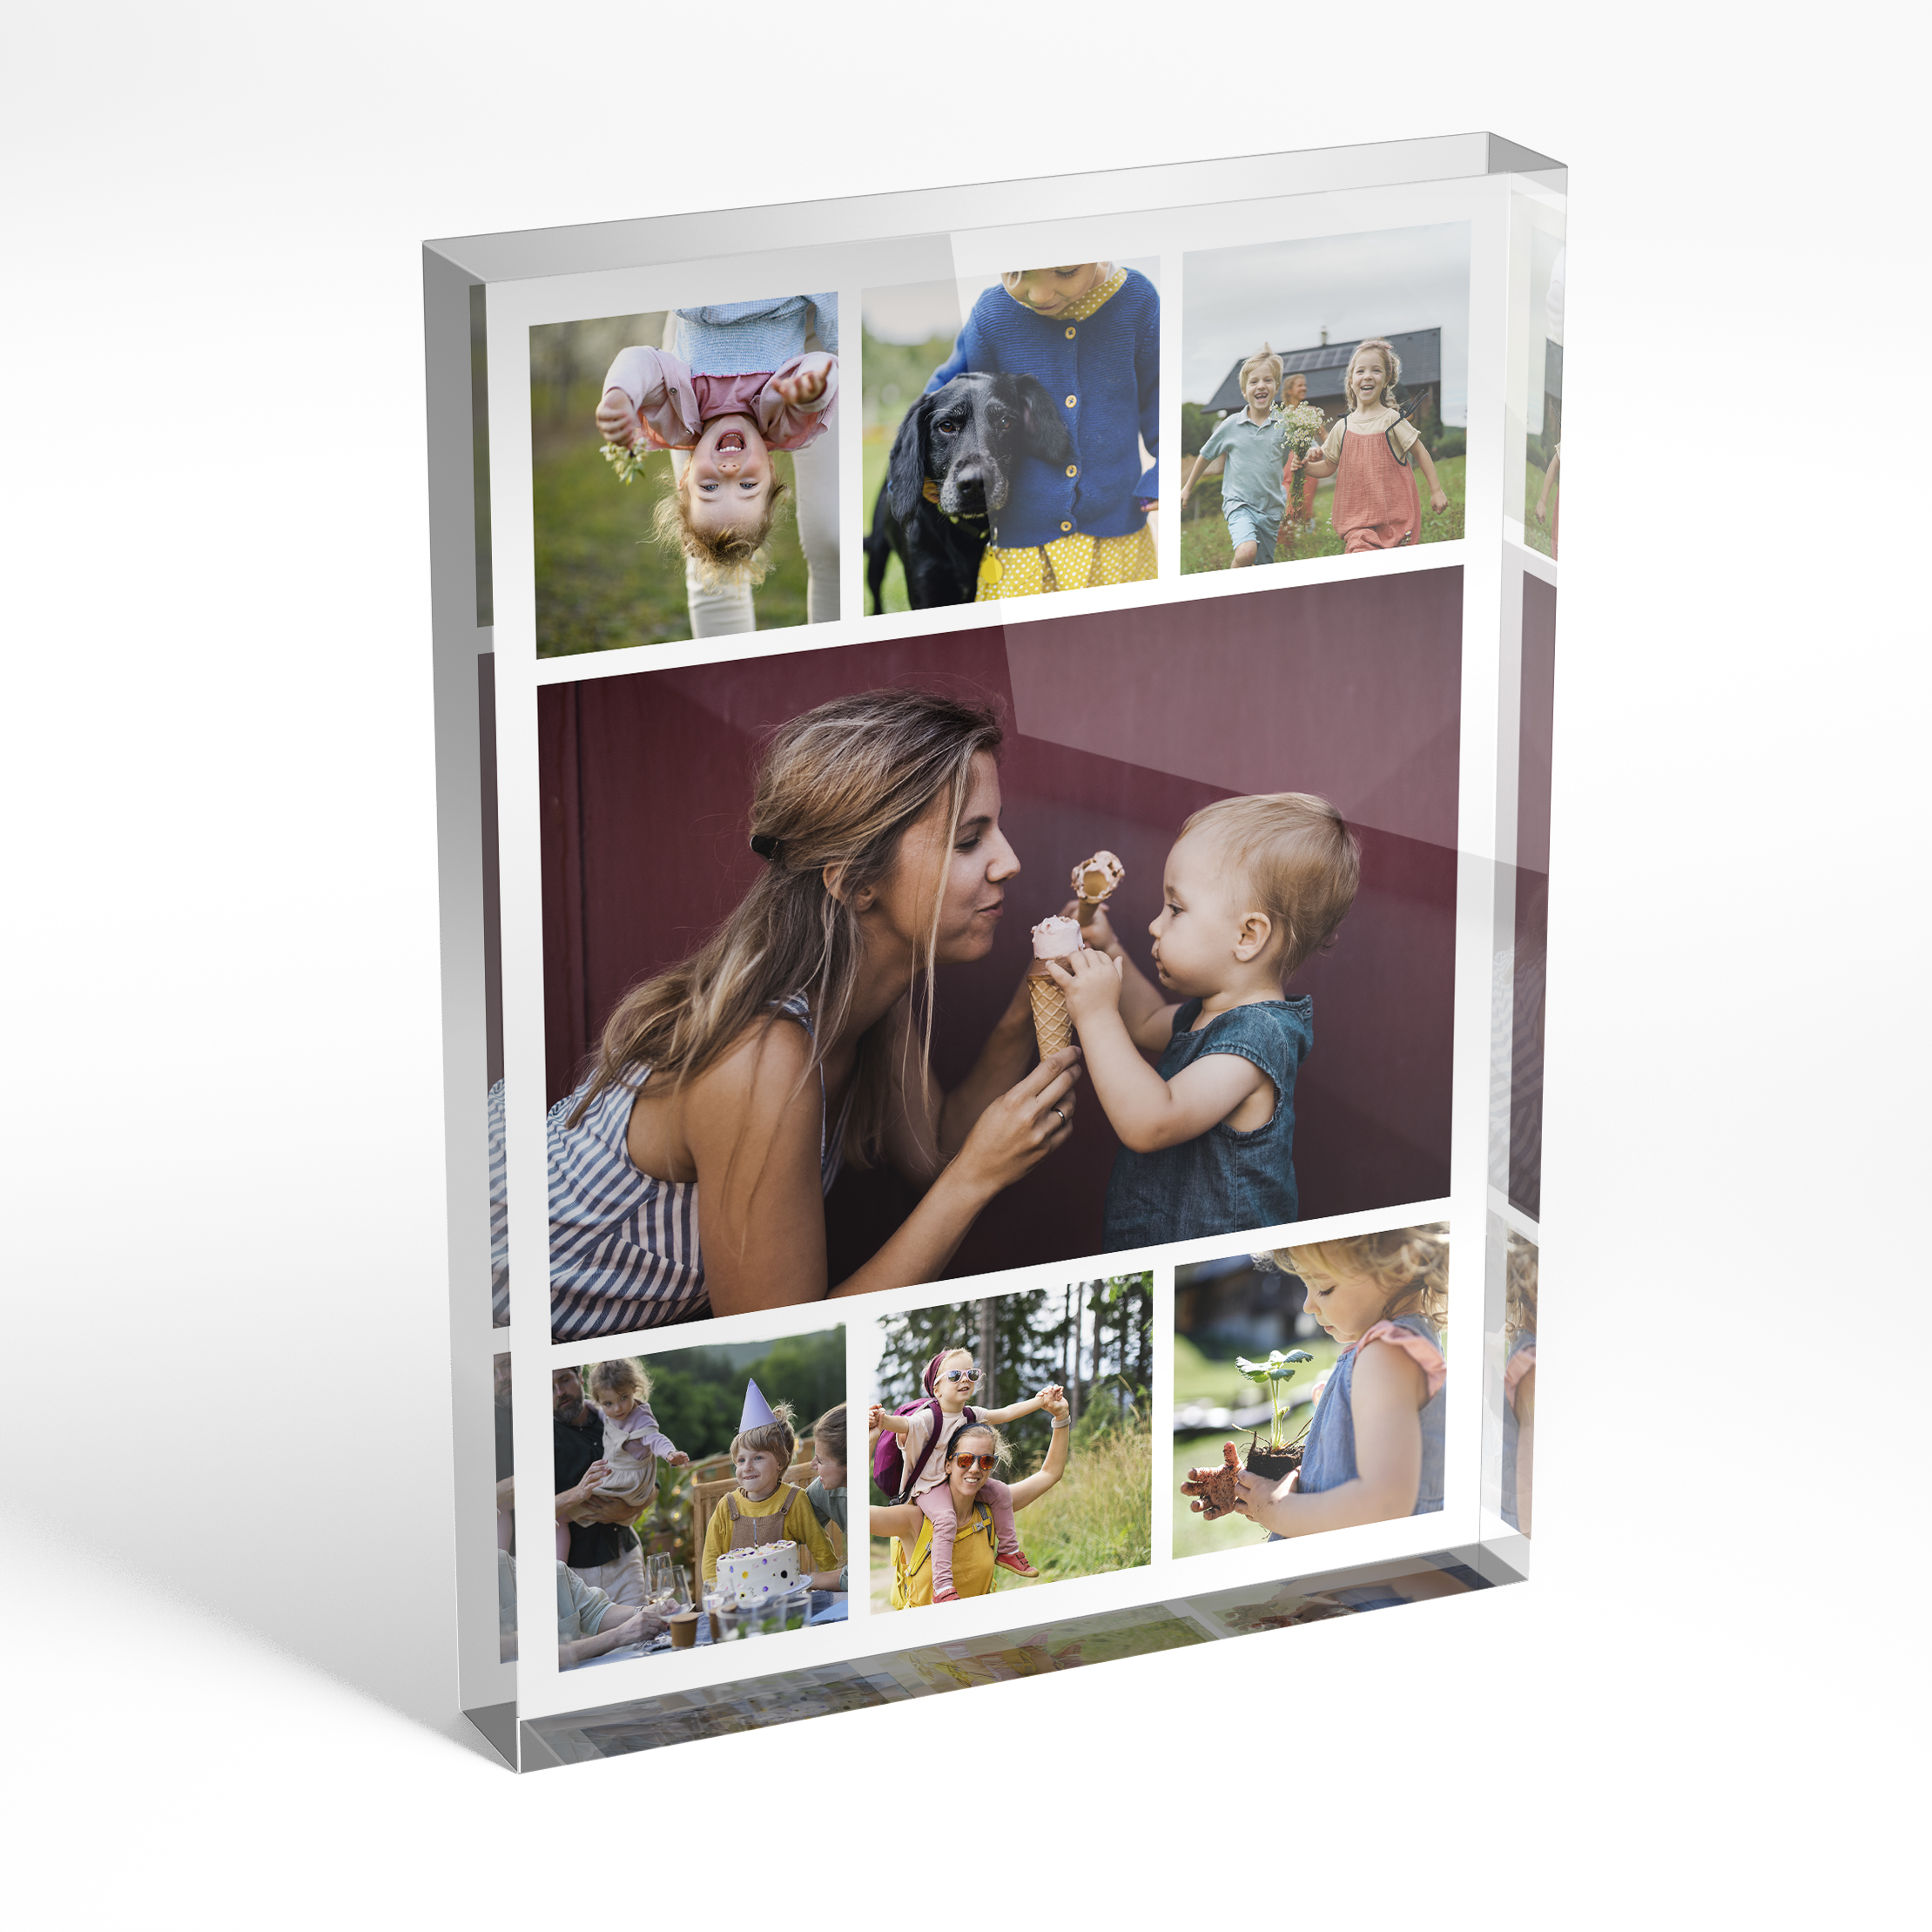 A front side view of a portrait layout Acrylic Glass Photo Block with space for 7 photos. Thiis design is named 'Tapestry of Time'. 